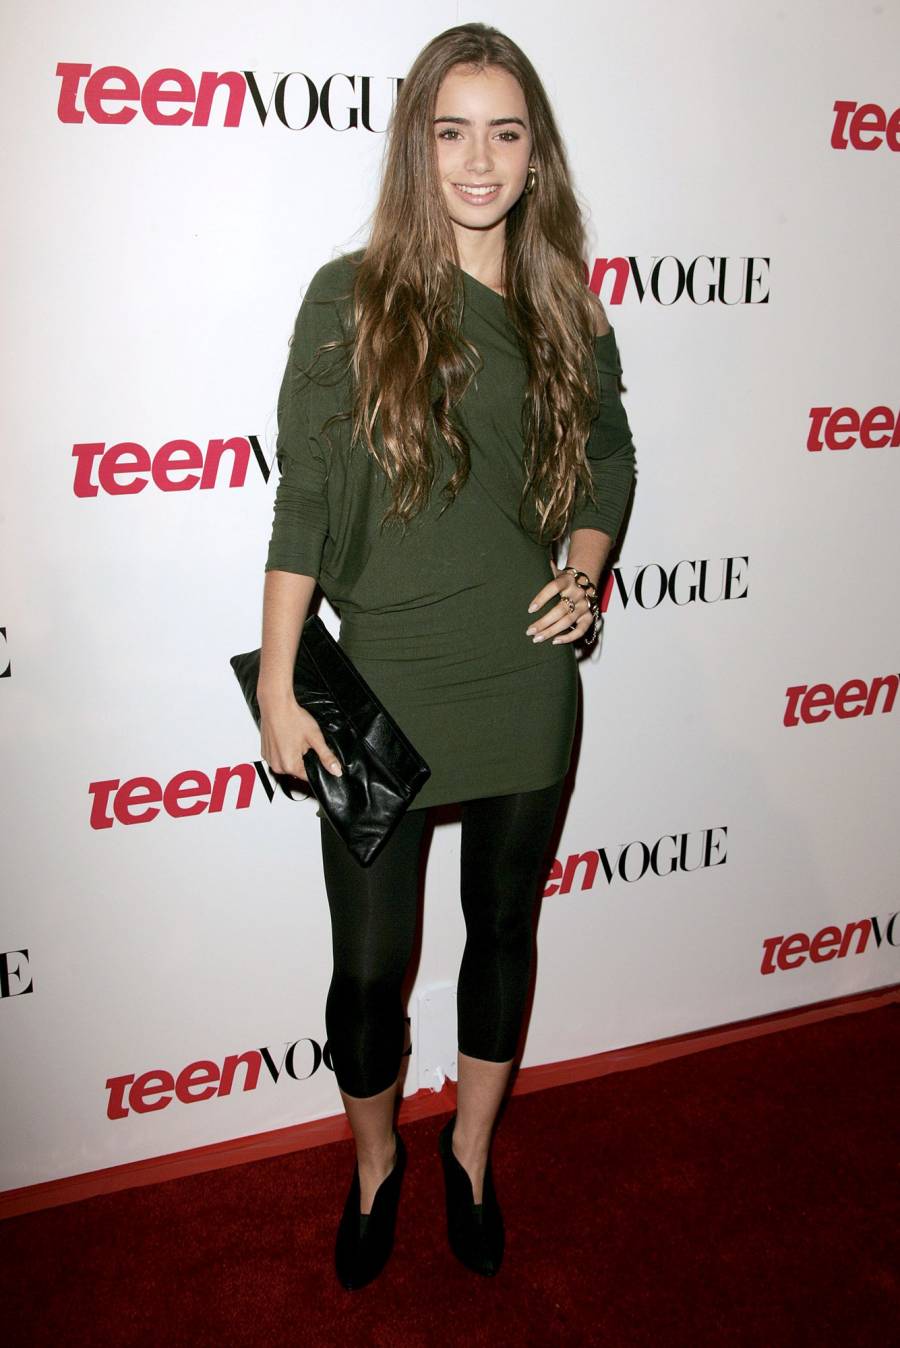 Teen Vogue Young Hollywood Issue Party 2006 Lily Collins Dramatic Fashion Evolution Through the Years